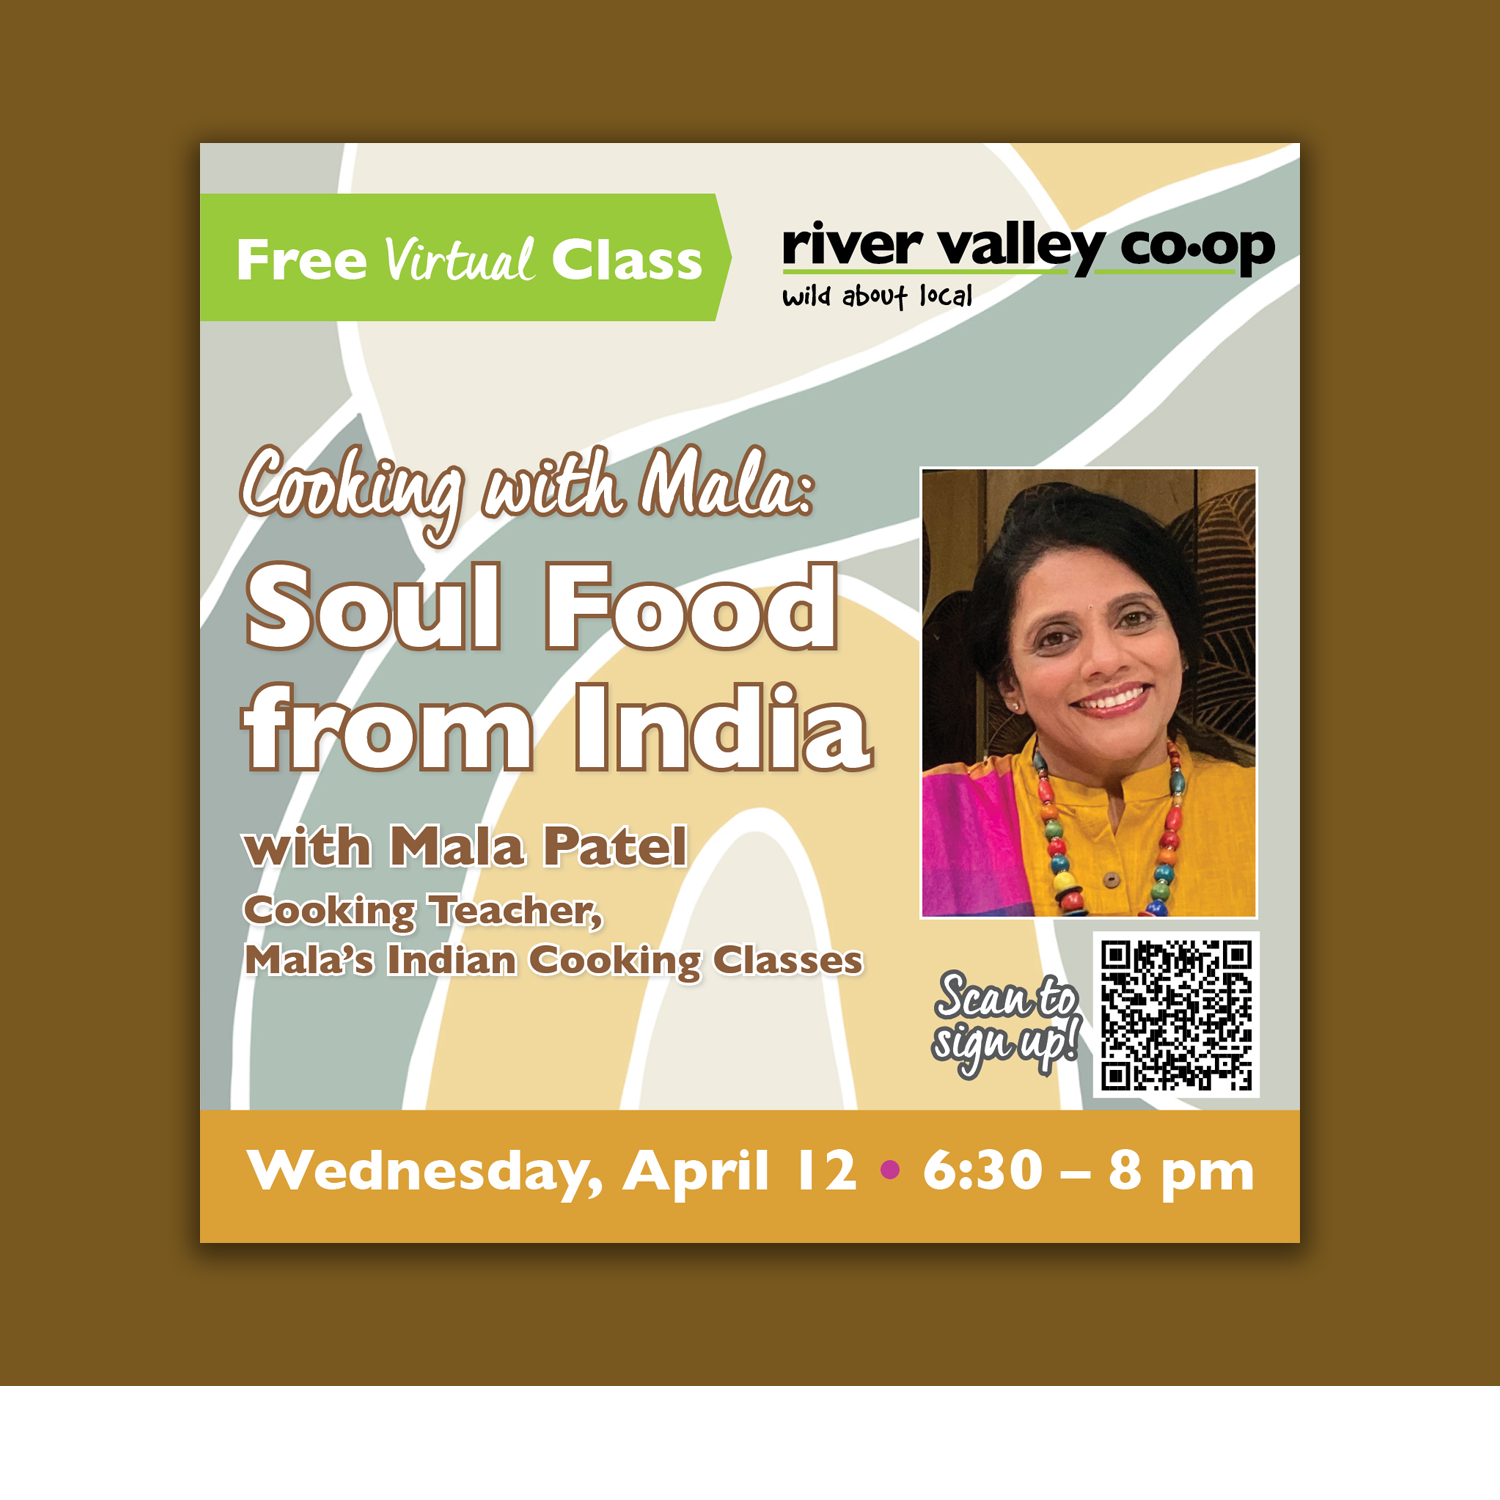 April 12: Cooking with Mala - Soul Food from India